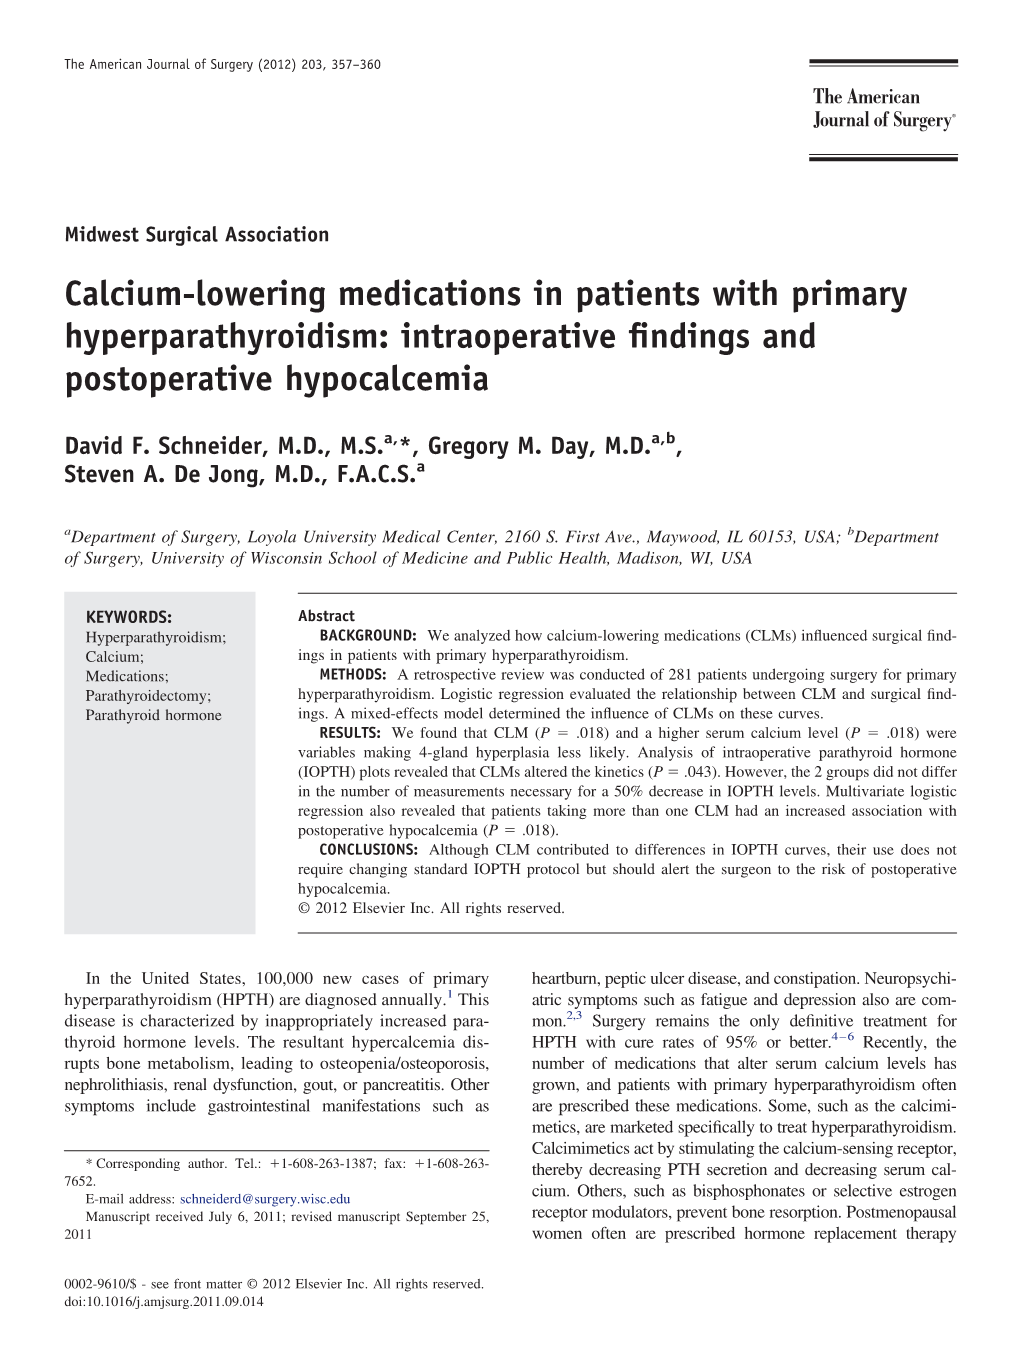 Calcium-Lowering Medications in Patients with Primary Hyperparathyroidism: Intraoperative ﬁndings and Postoperative Hypocalcemia